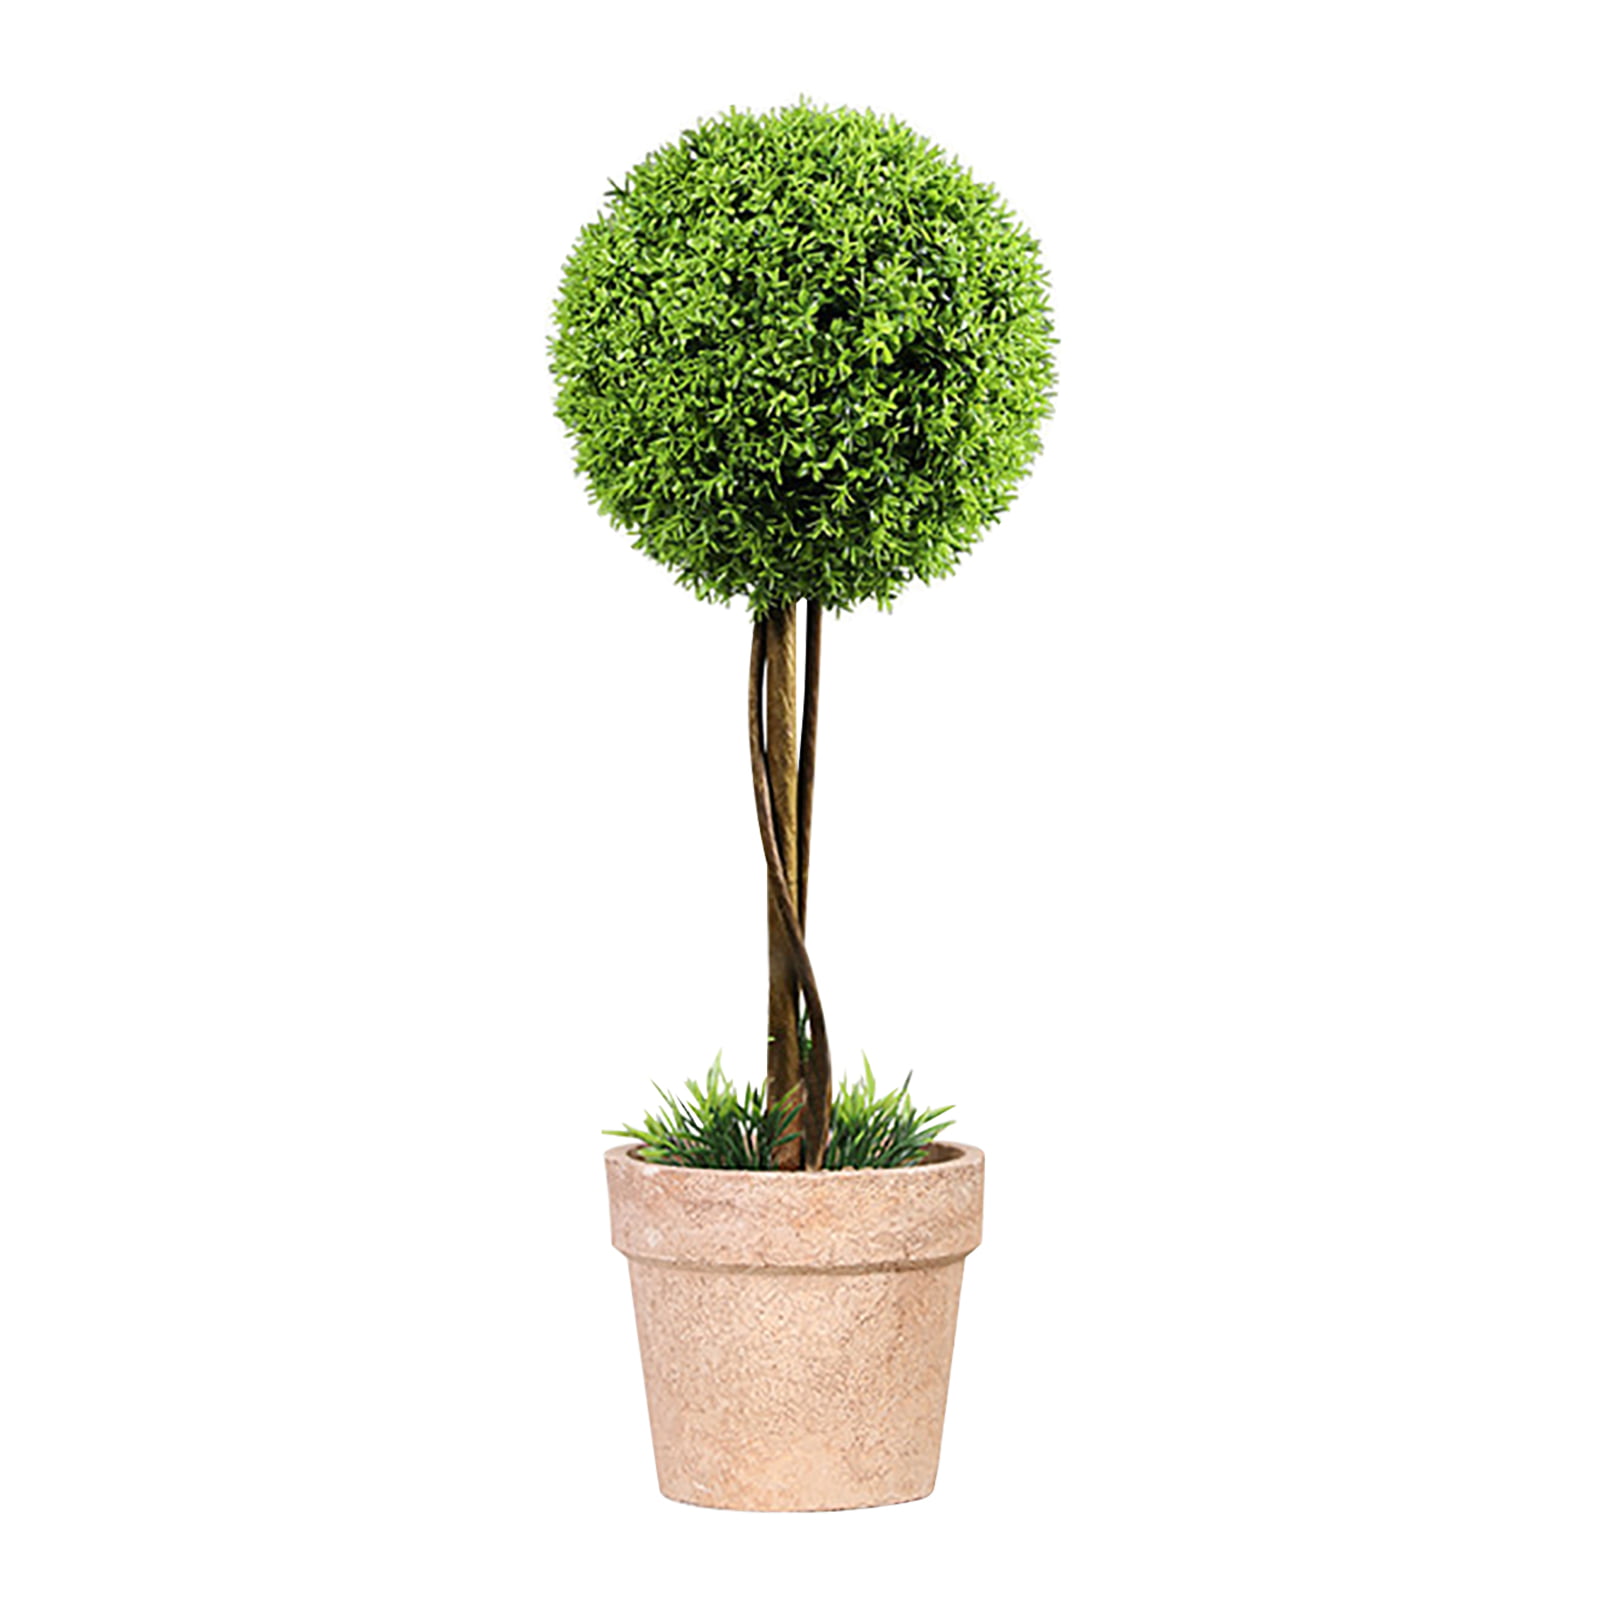 Large Topiary Artificial Potted Indoor Outdoor Home House Plant Tree Home Office 